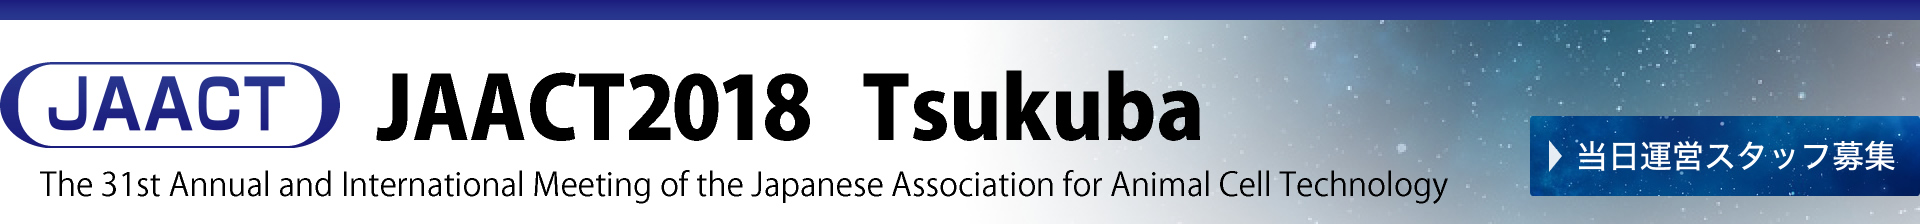 JAACT2018 Tsukuba
The 31st Annual and International Meeting of the Japanese Association for Animal Cell Technology